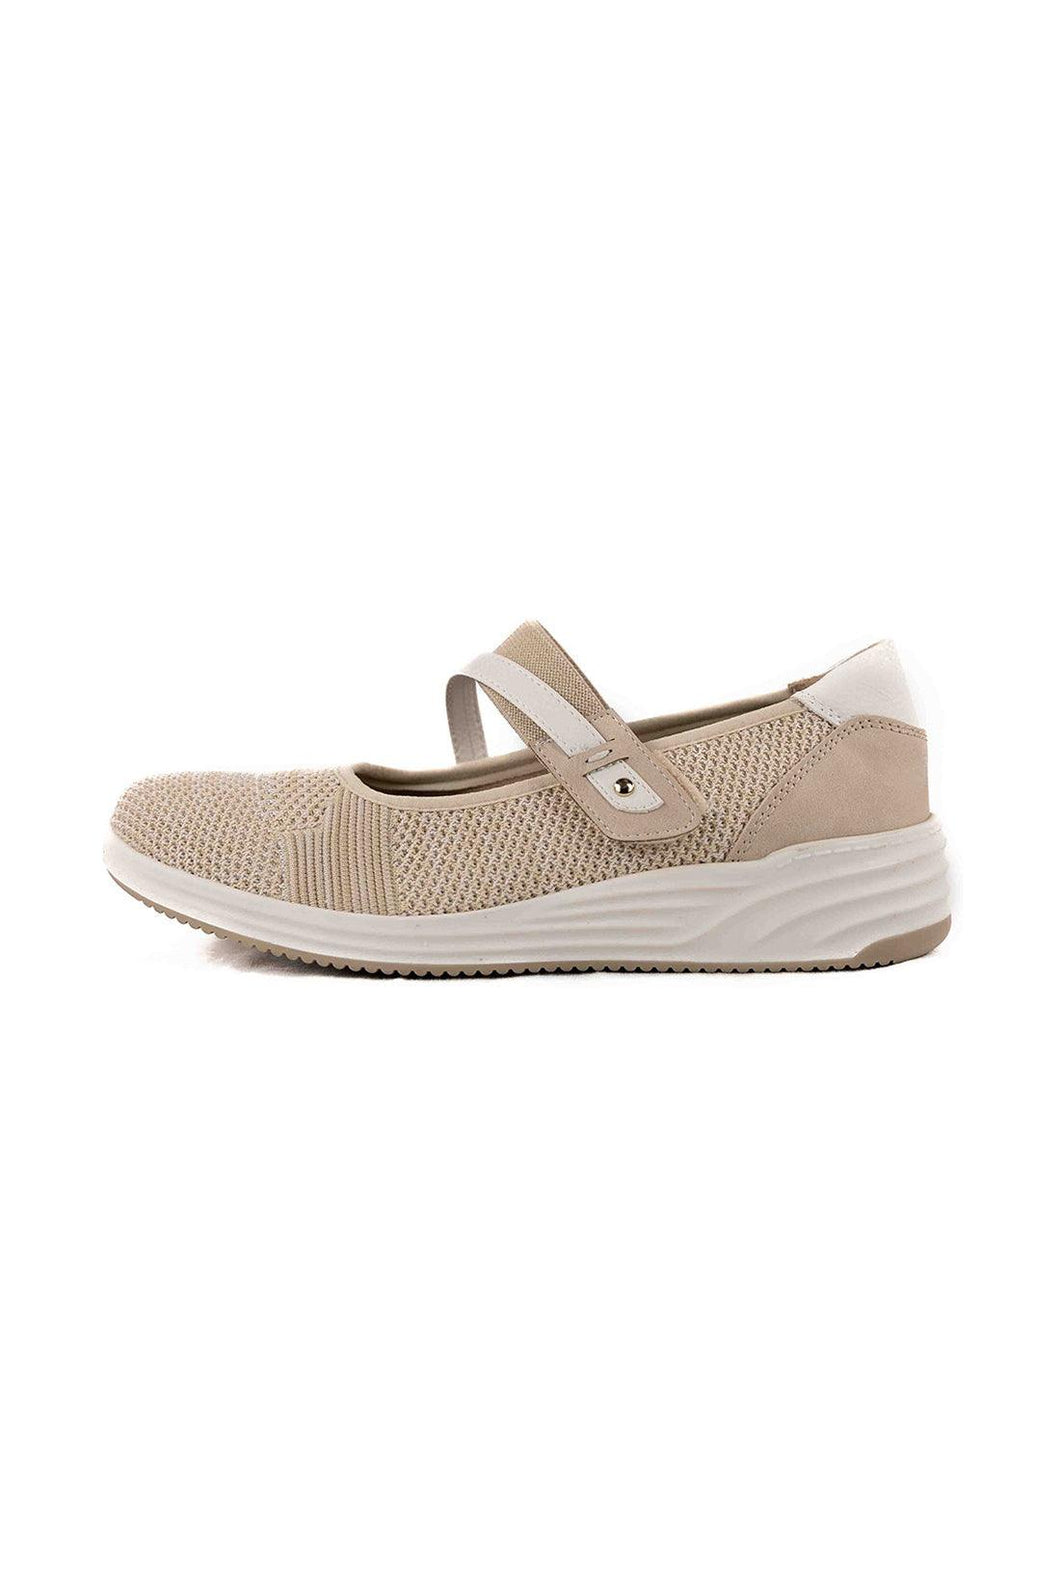 Janna Relife Casual Walking Shoe by Relife